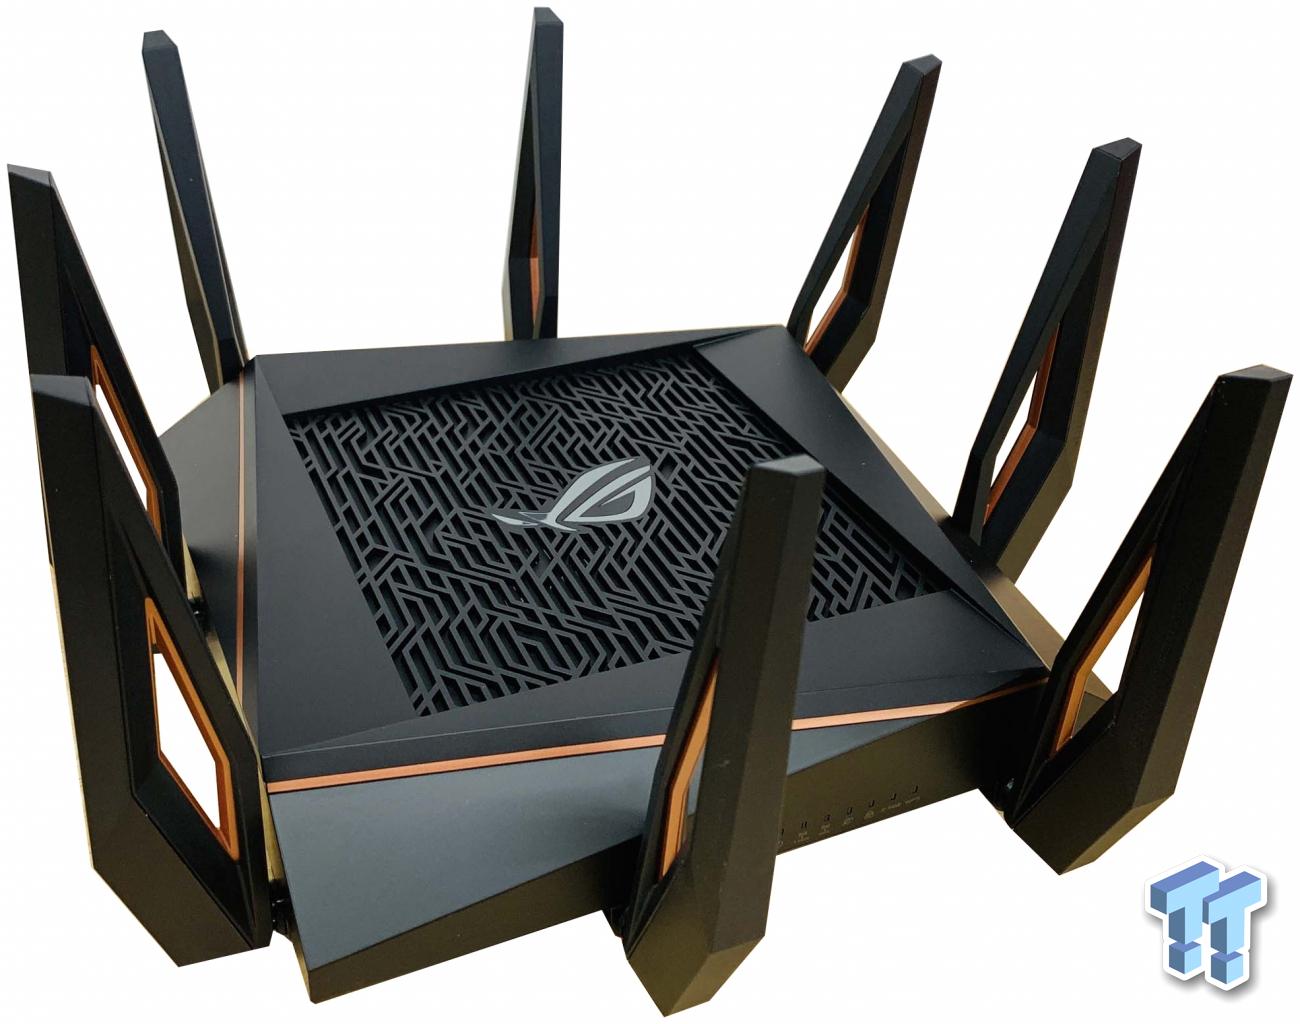 deres jeg er syg Bage ASUS ROG Rapture AX11000 Wi-Fi 6 Router Review